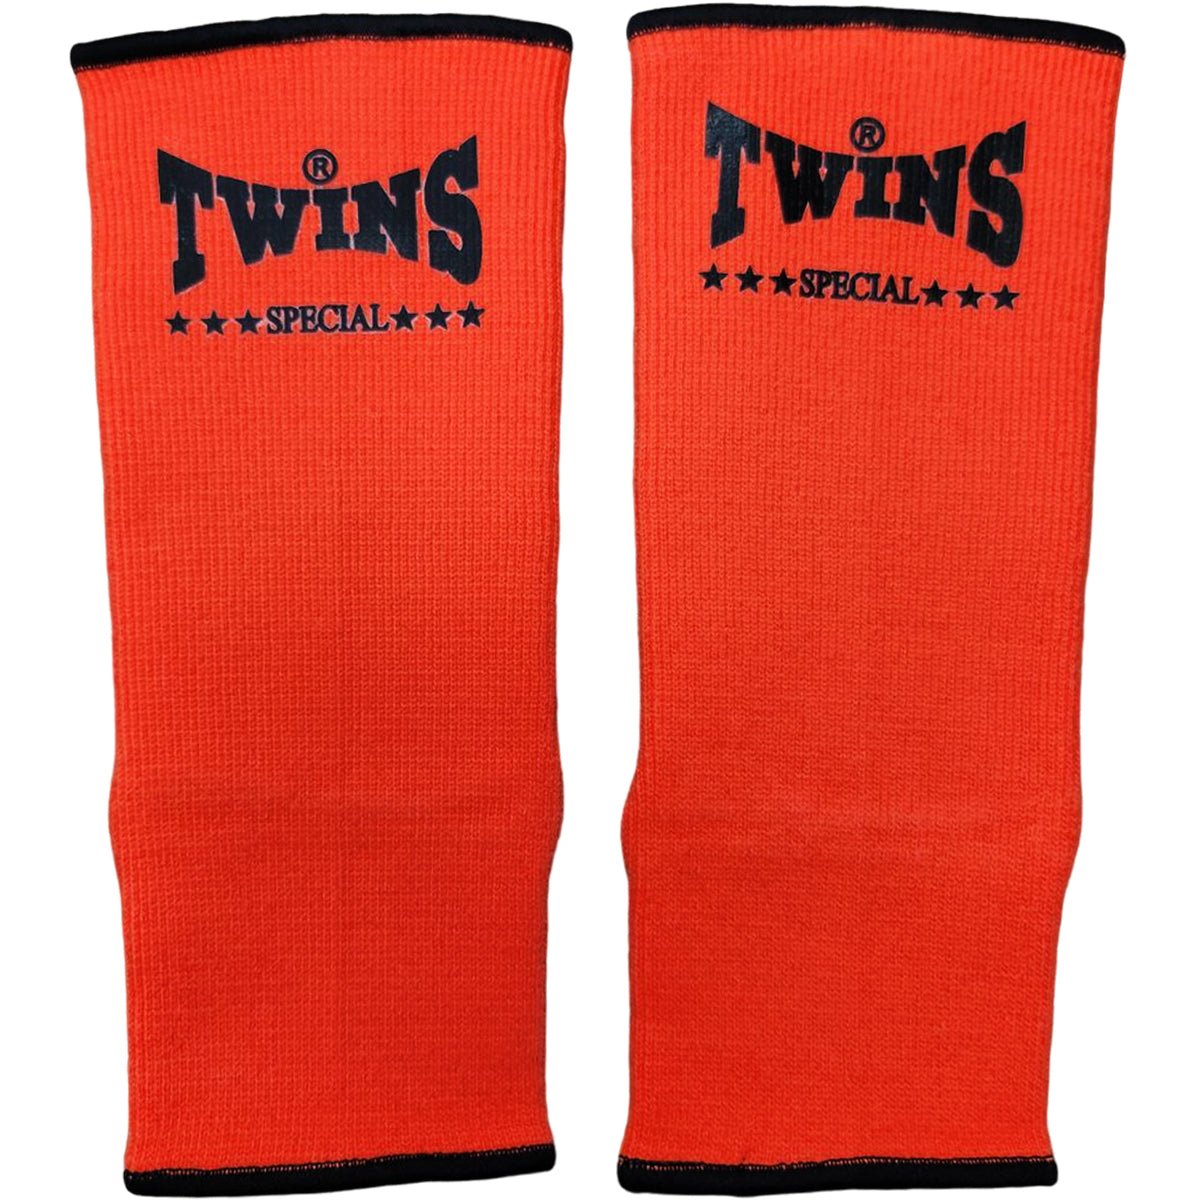 Ankle Support Twins Special AG Orange Foot Protection